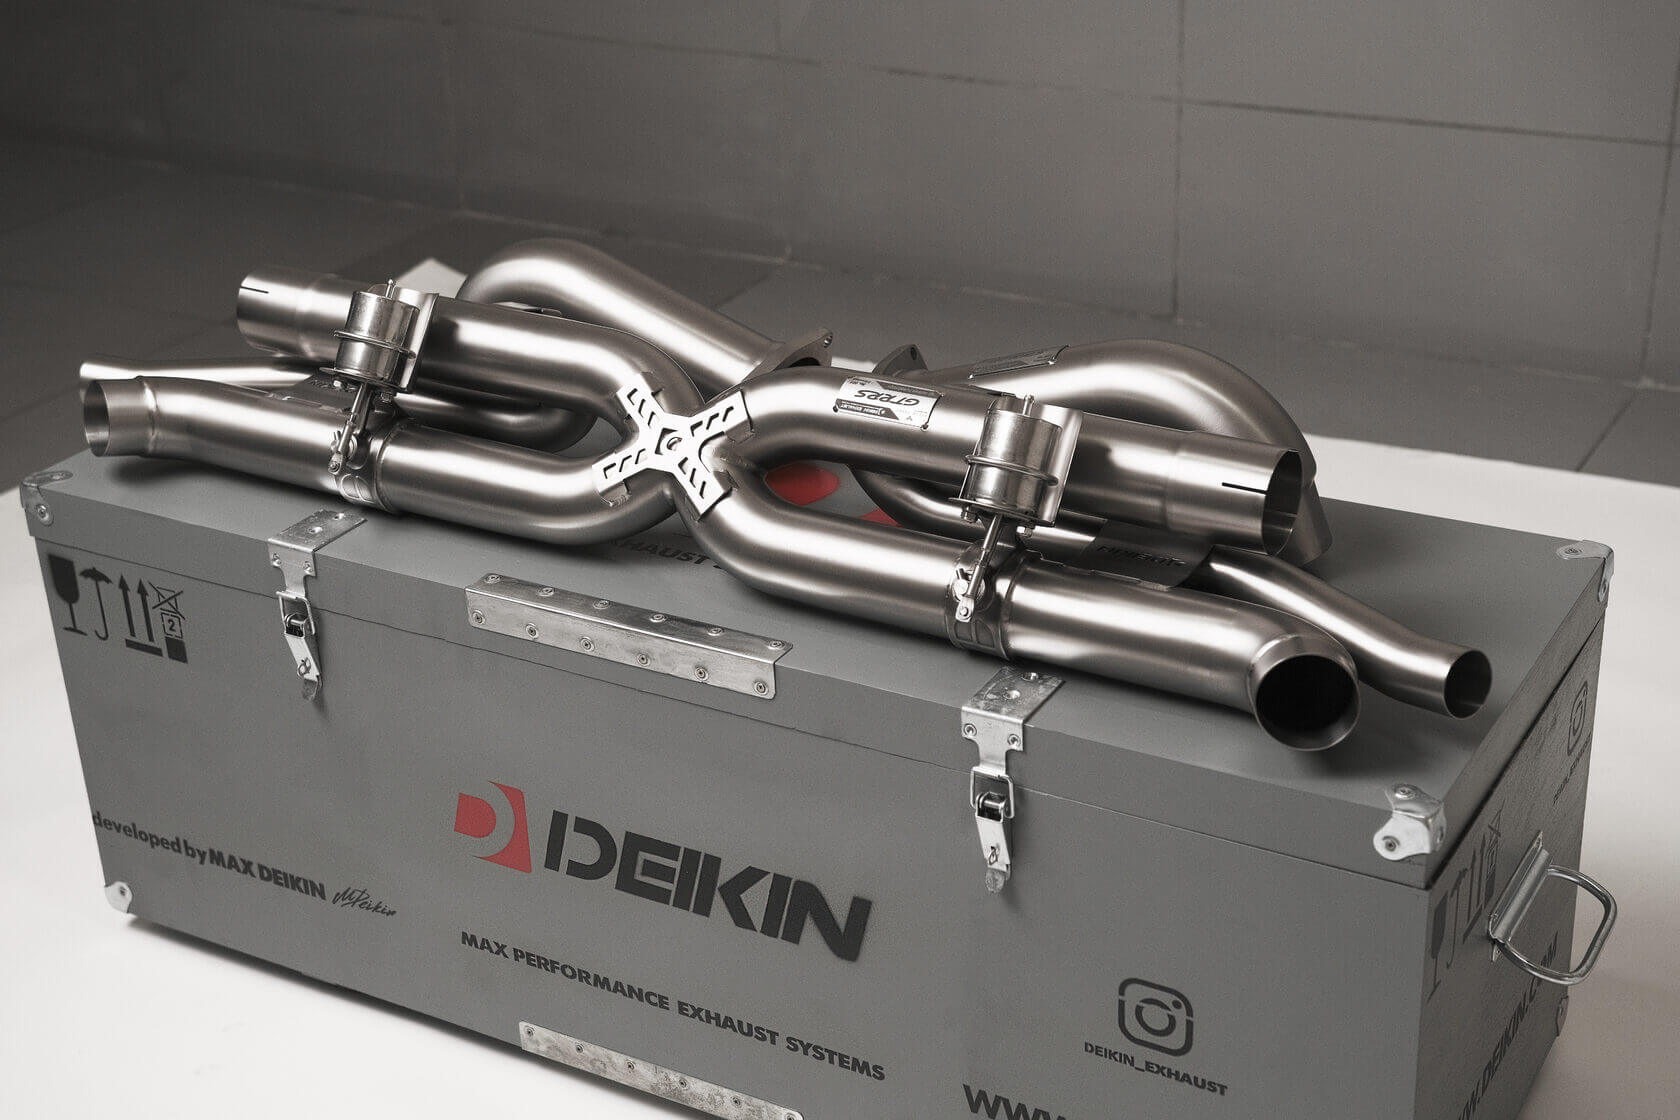 DEIKIN 10-PO.911.T/TS.991.2/R-ES-Ti-00 Exhaust system "Race" Titan for Porsche 911 Turbo/Turbo S (991.2) complete with downpipes without HeatShield Photo-3 